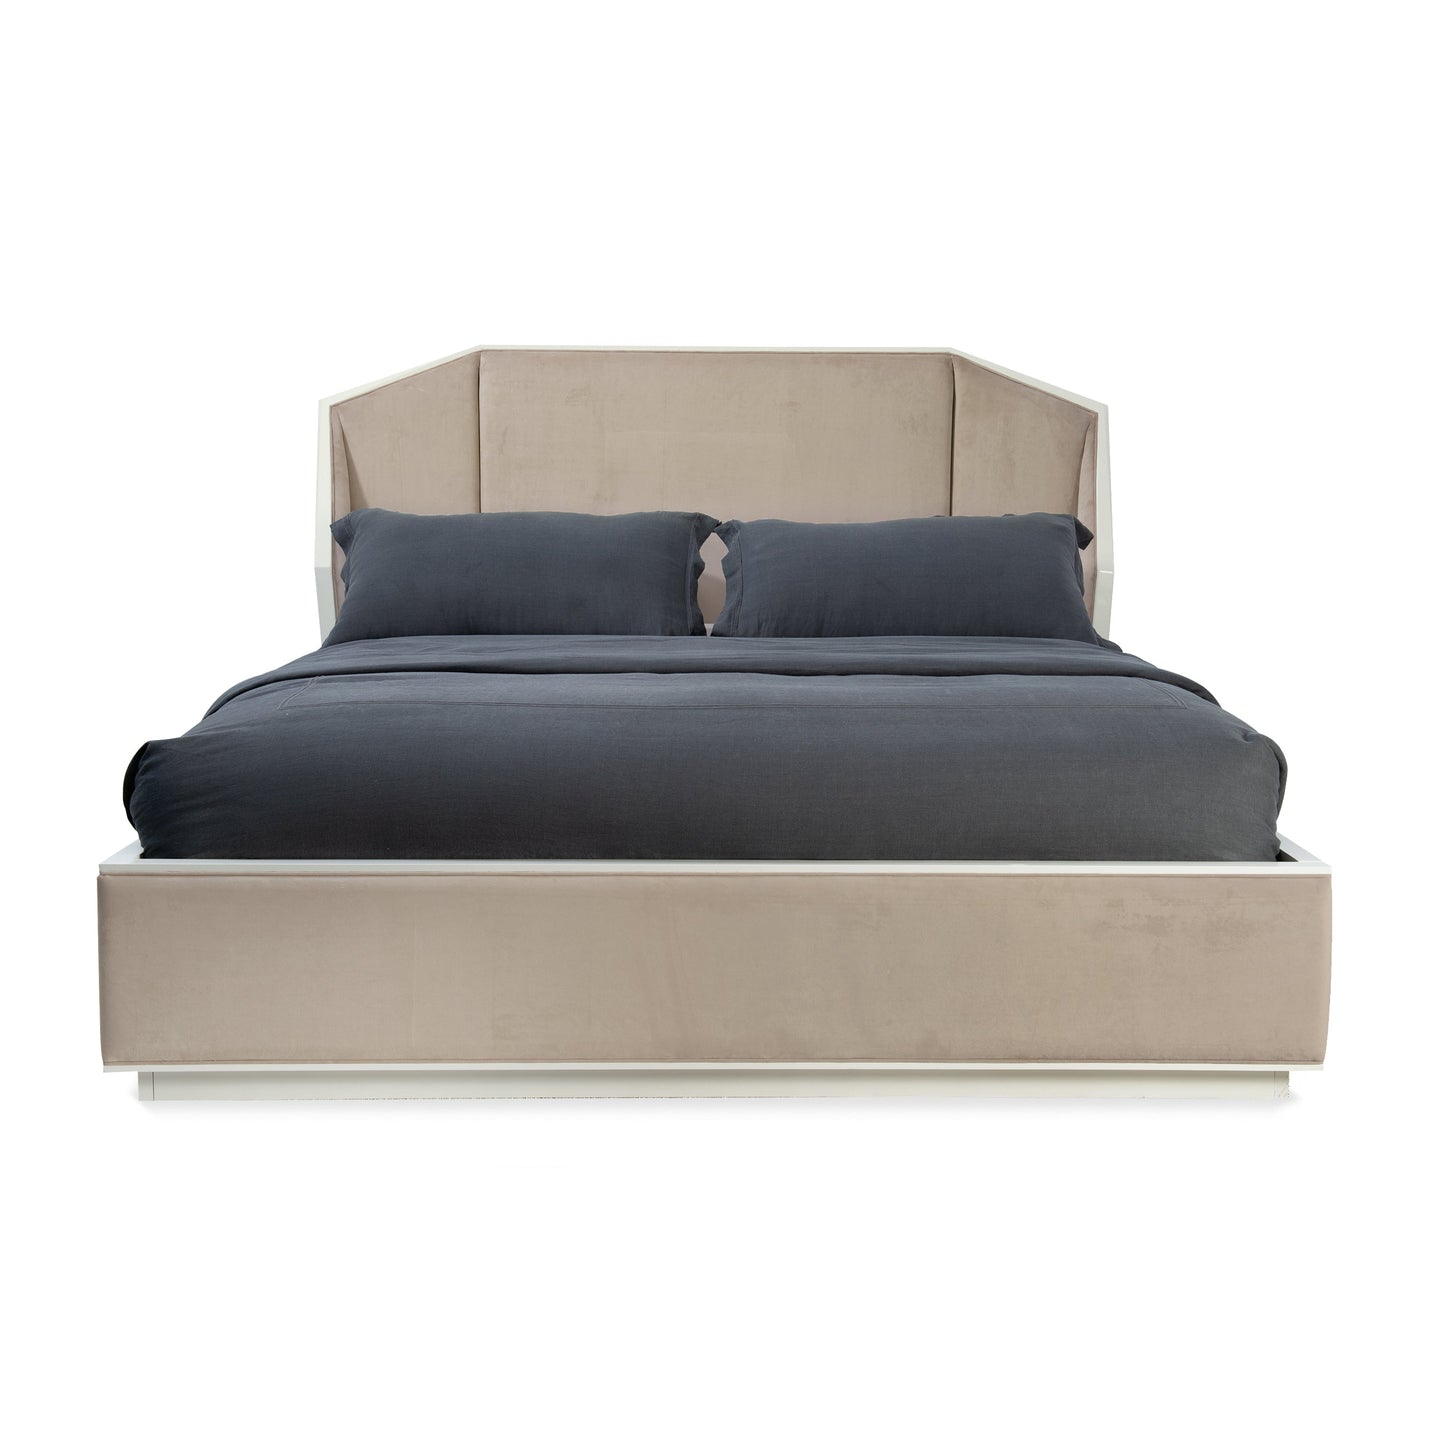 Expressions Upholstered Bed